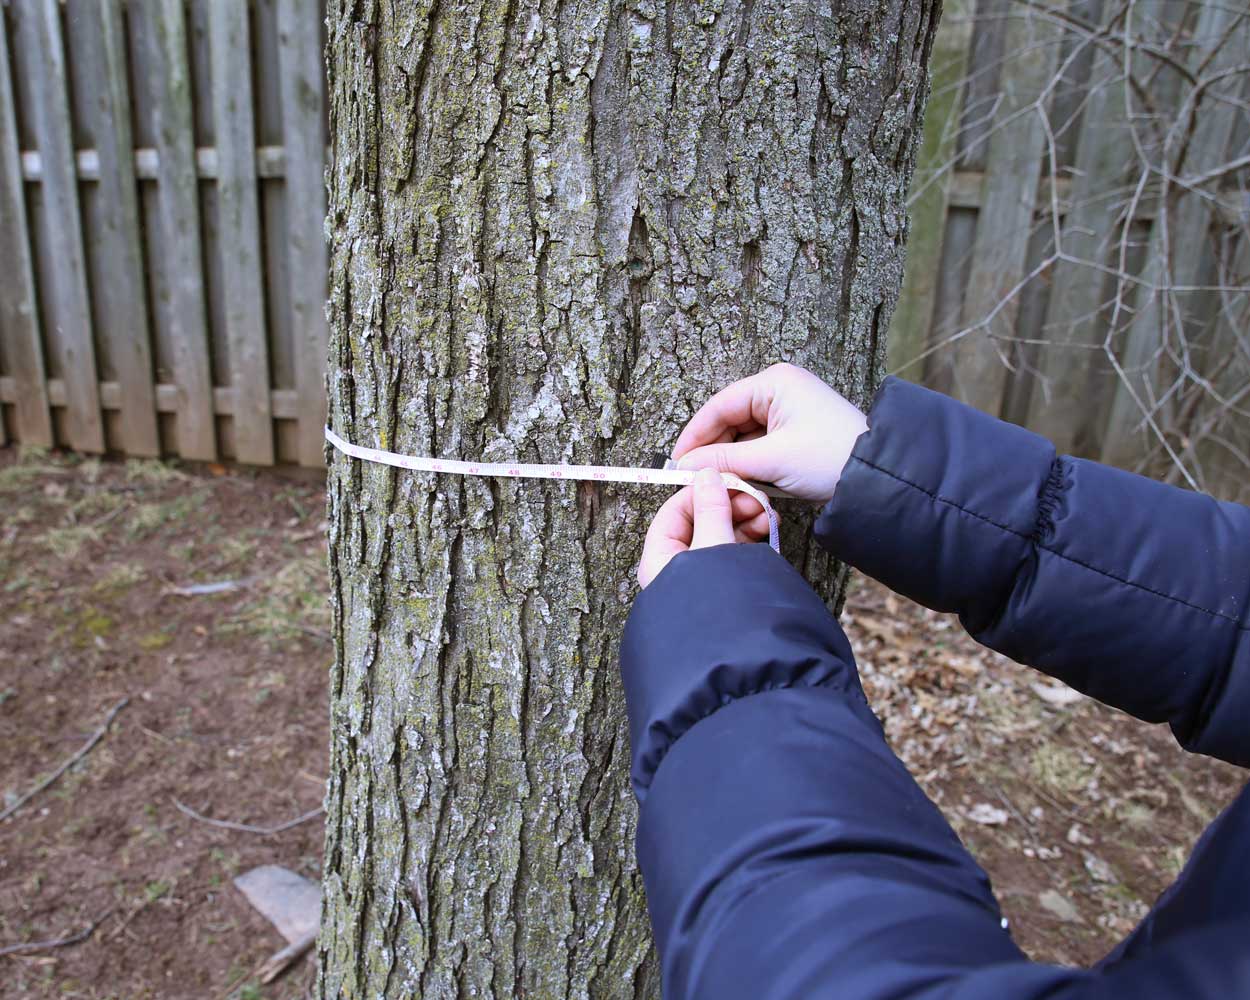 A pair of hands using a soft measuring tape to measure the circumference of a tree trunk